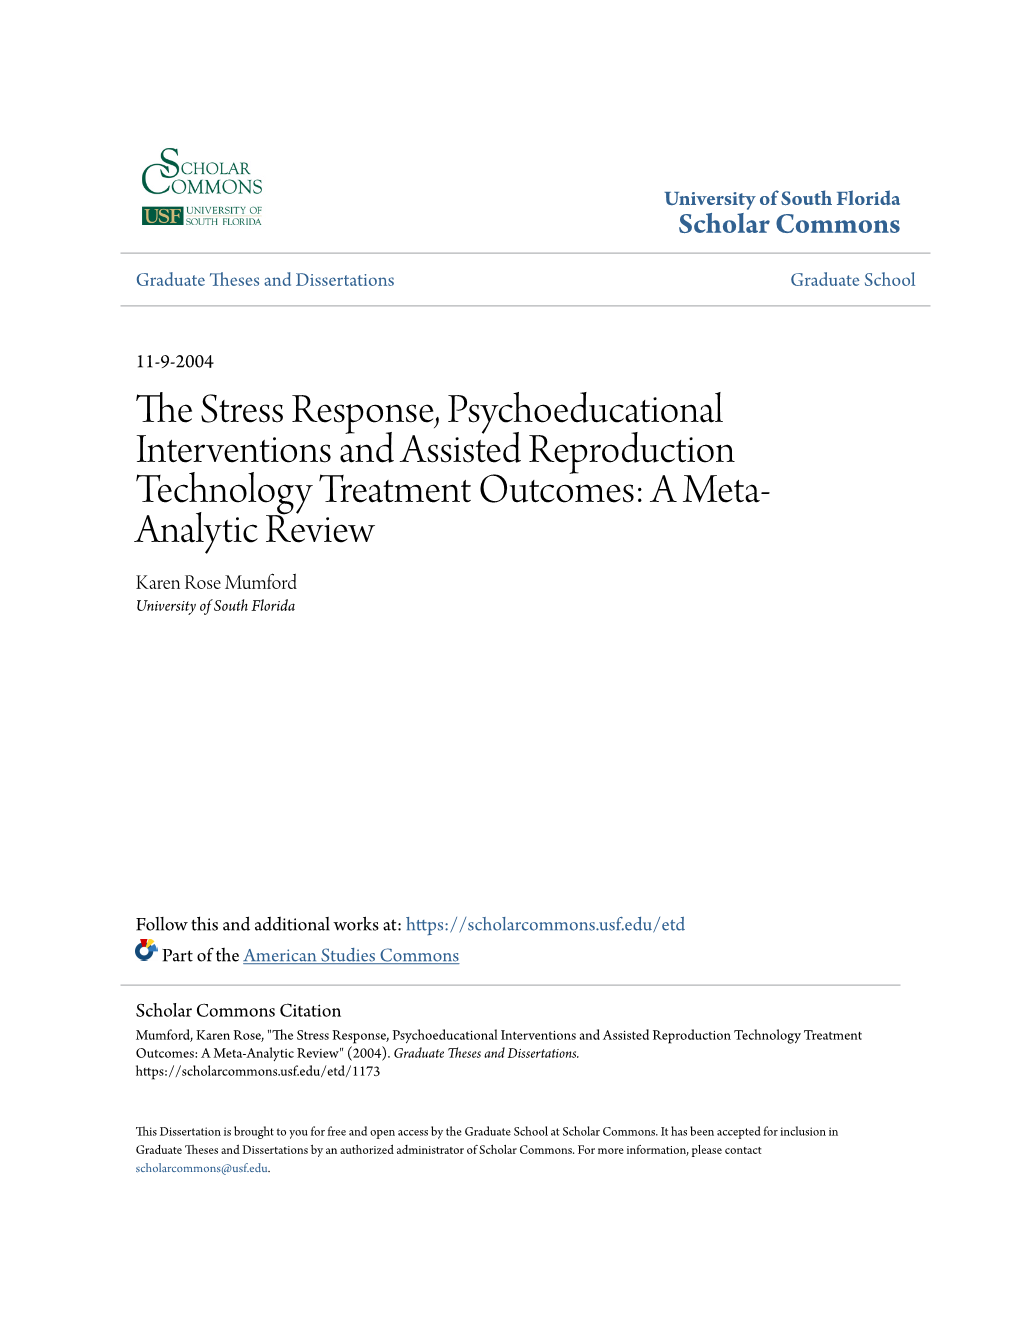 The Stress Response, Psychoeducational Interventions and Assisted